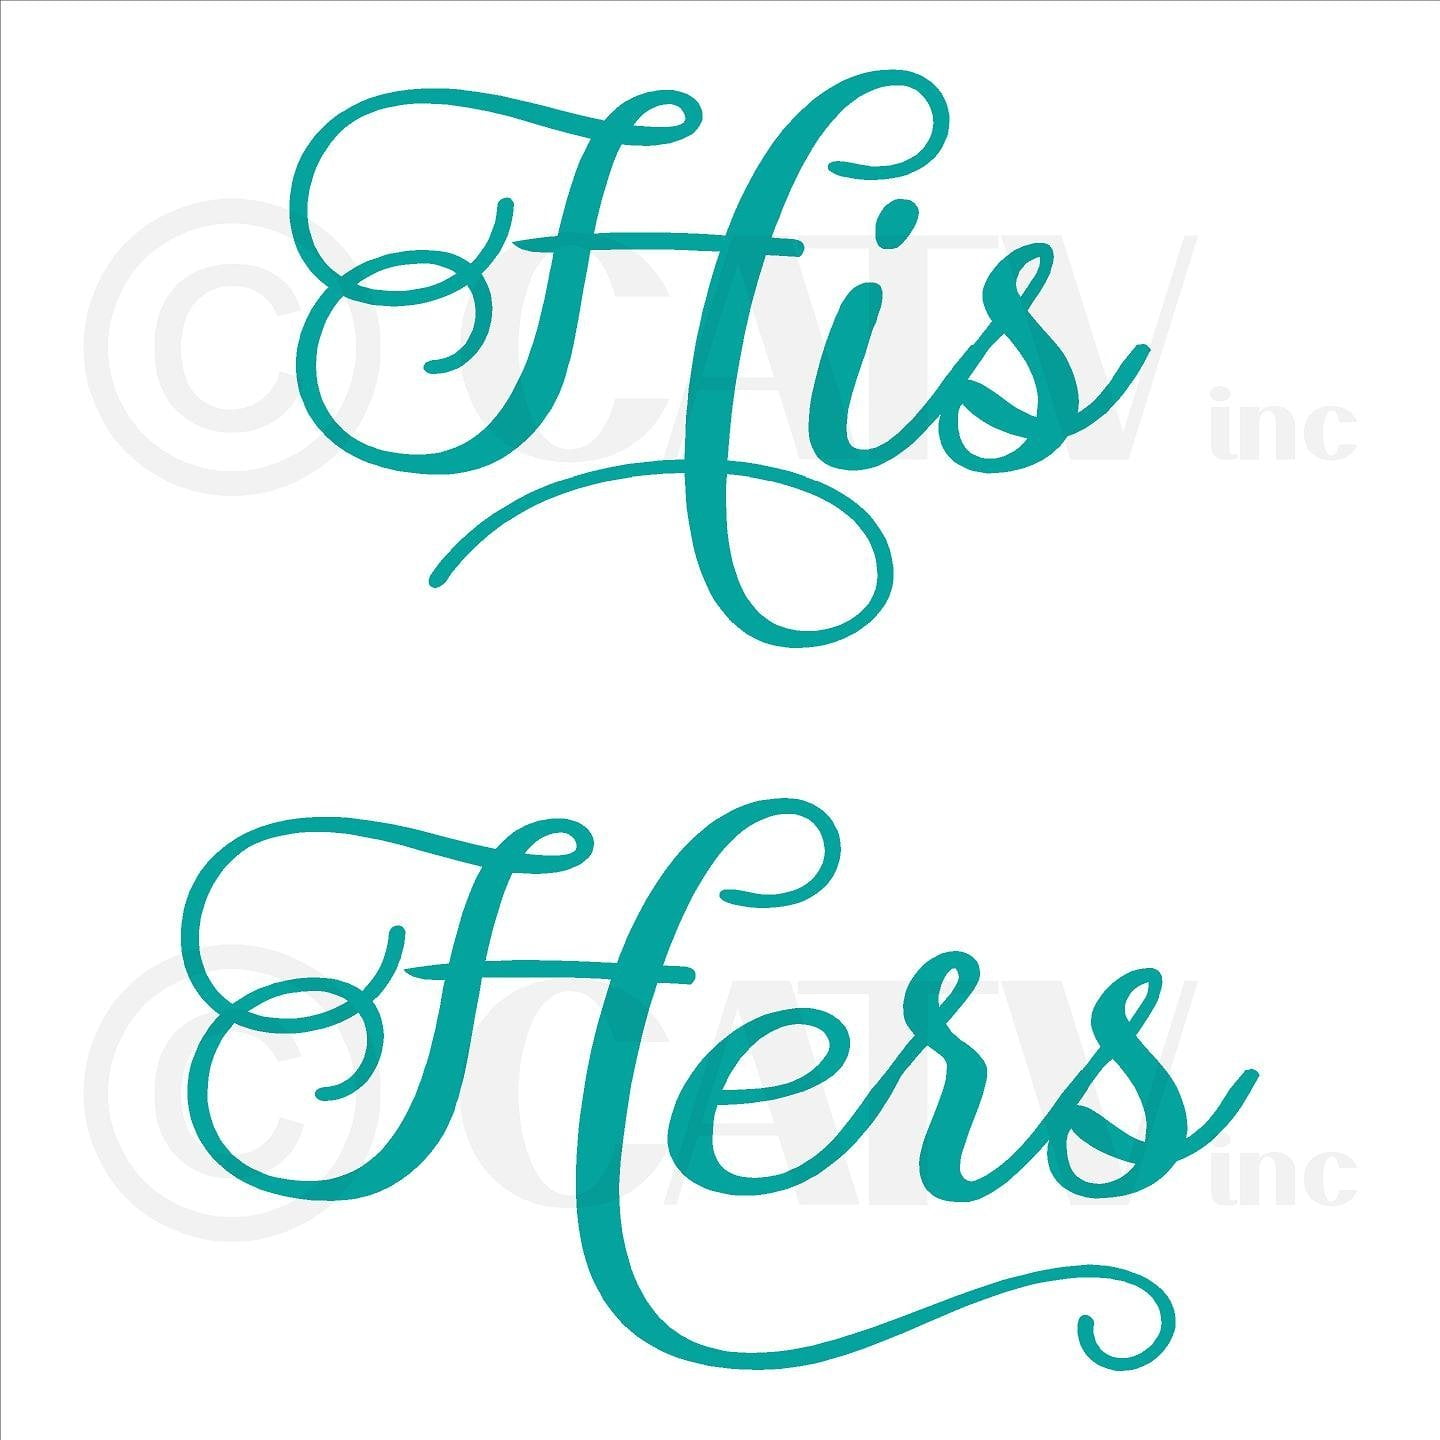 His and Hers Vinyl Lettering Wall Decal Sticker Bathroom Decals Size: 6H x  9L, 6H x 11L - Color: Black 